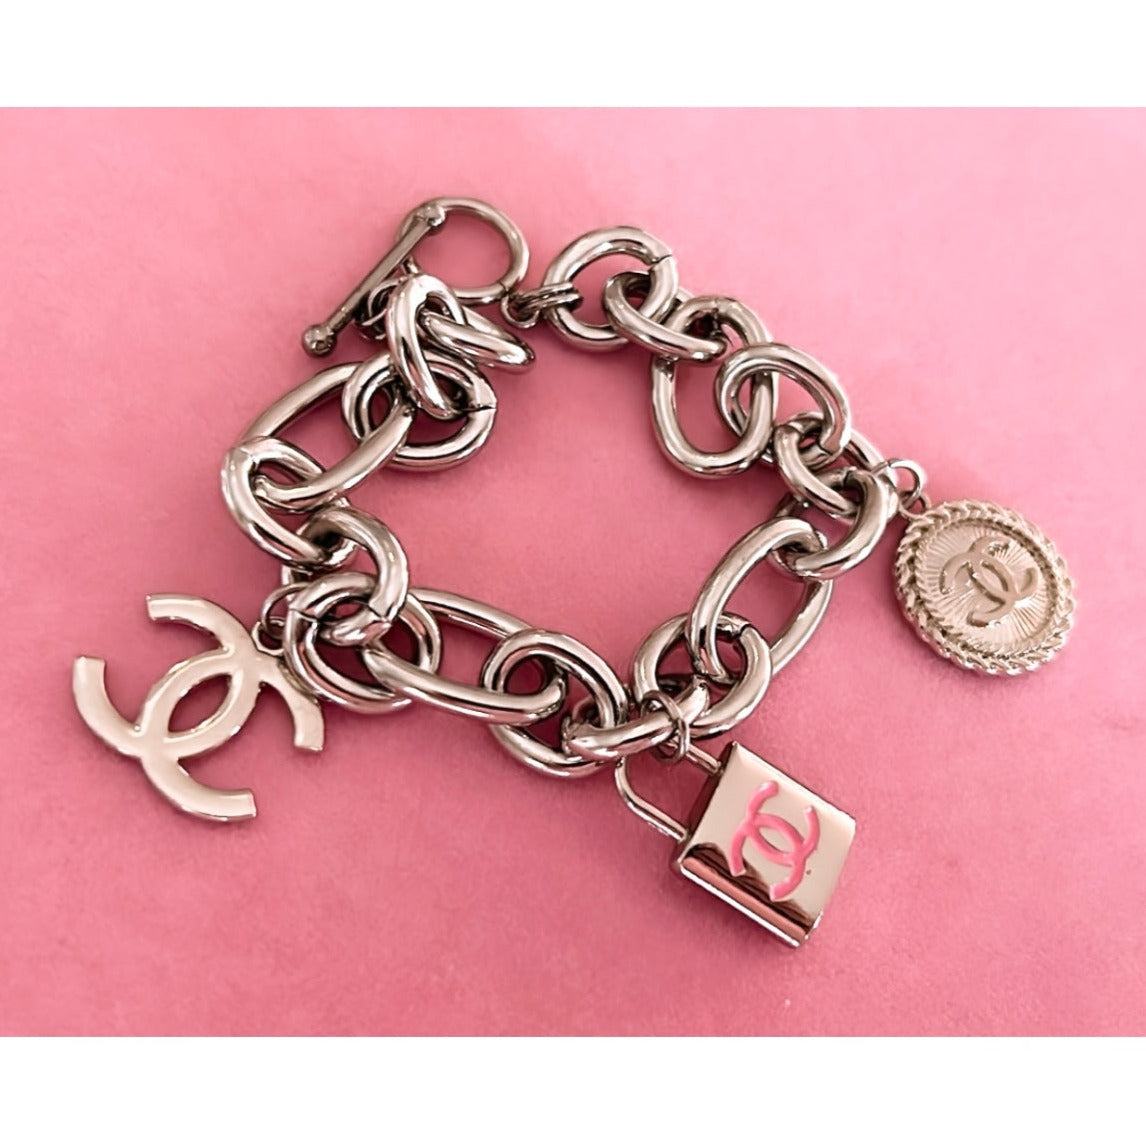 The Chunky Charm Bracelet in Silver